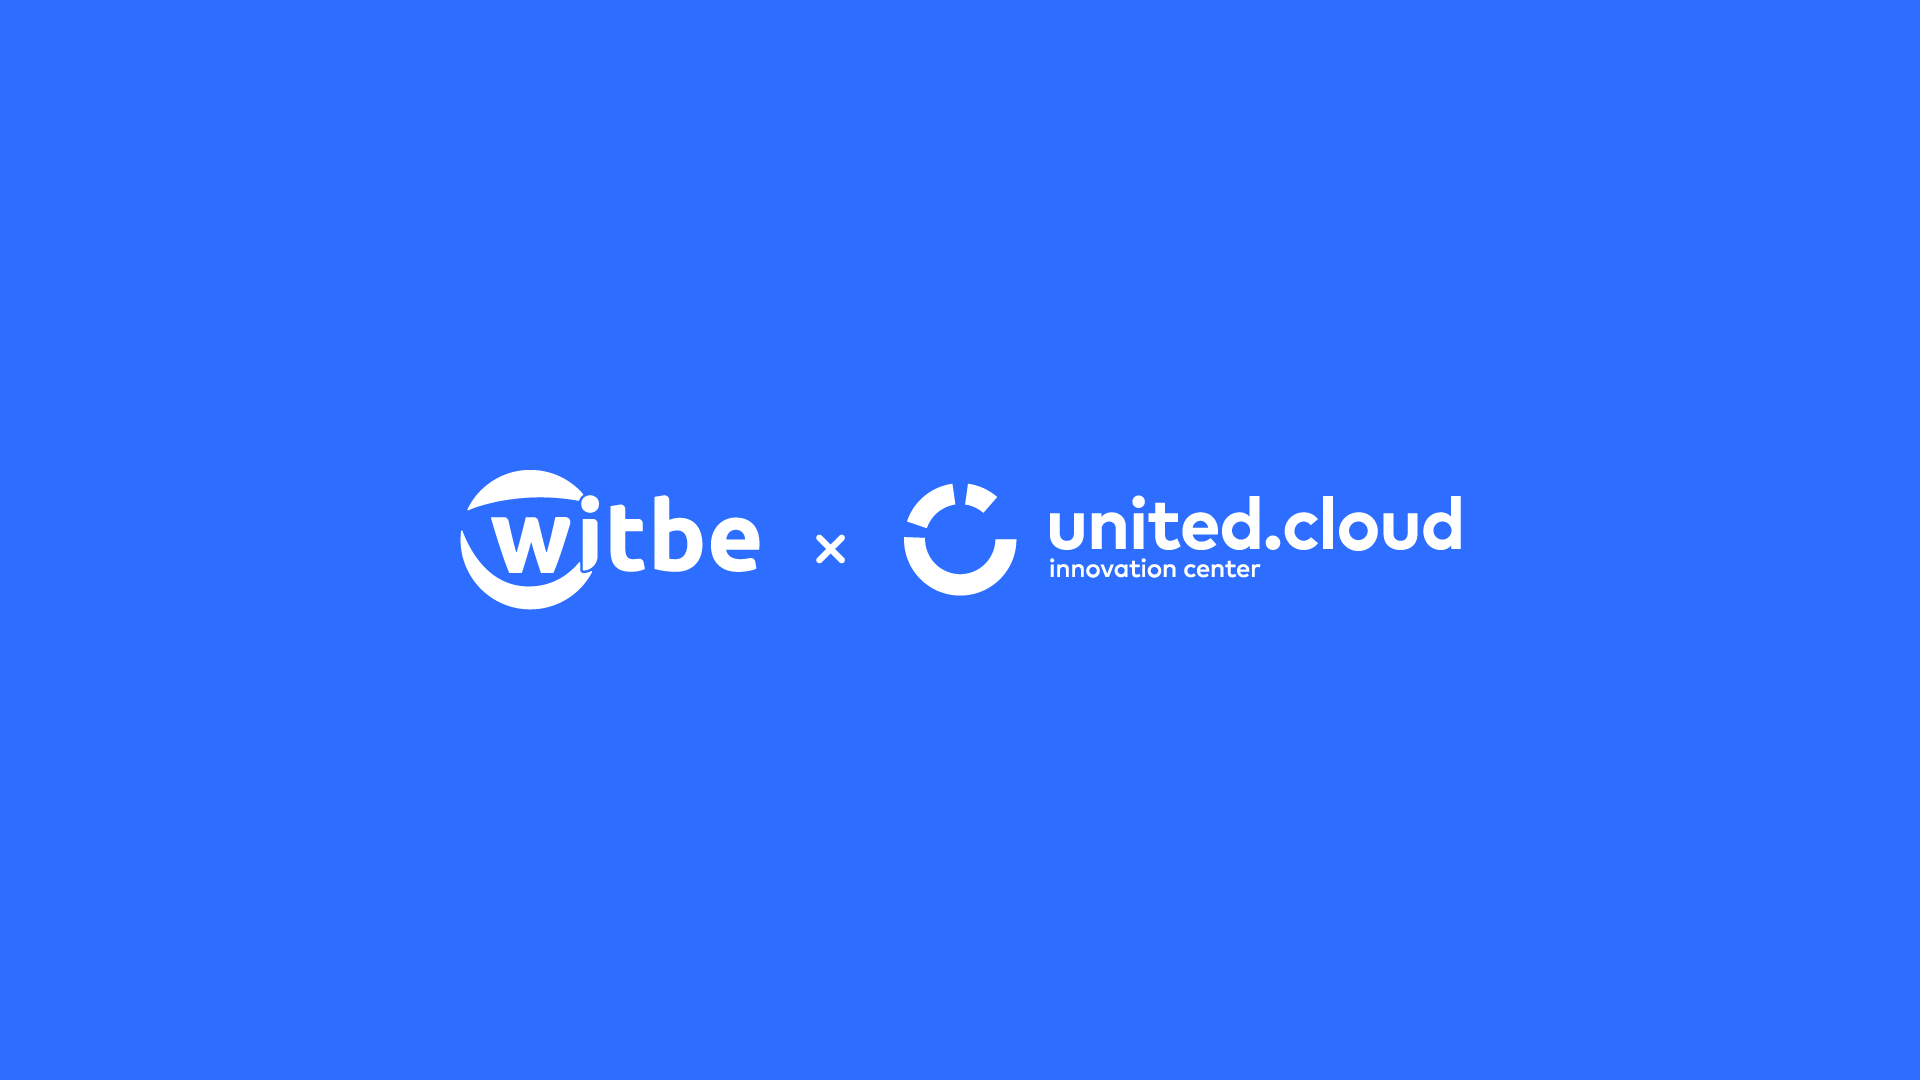 United Cloud chooses Witbe to help ensure best-in-class services across Europe